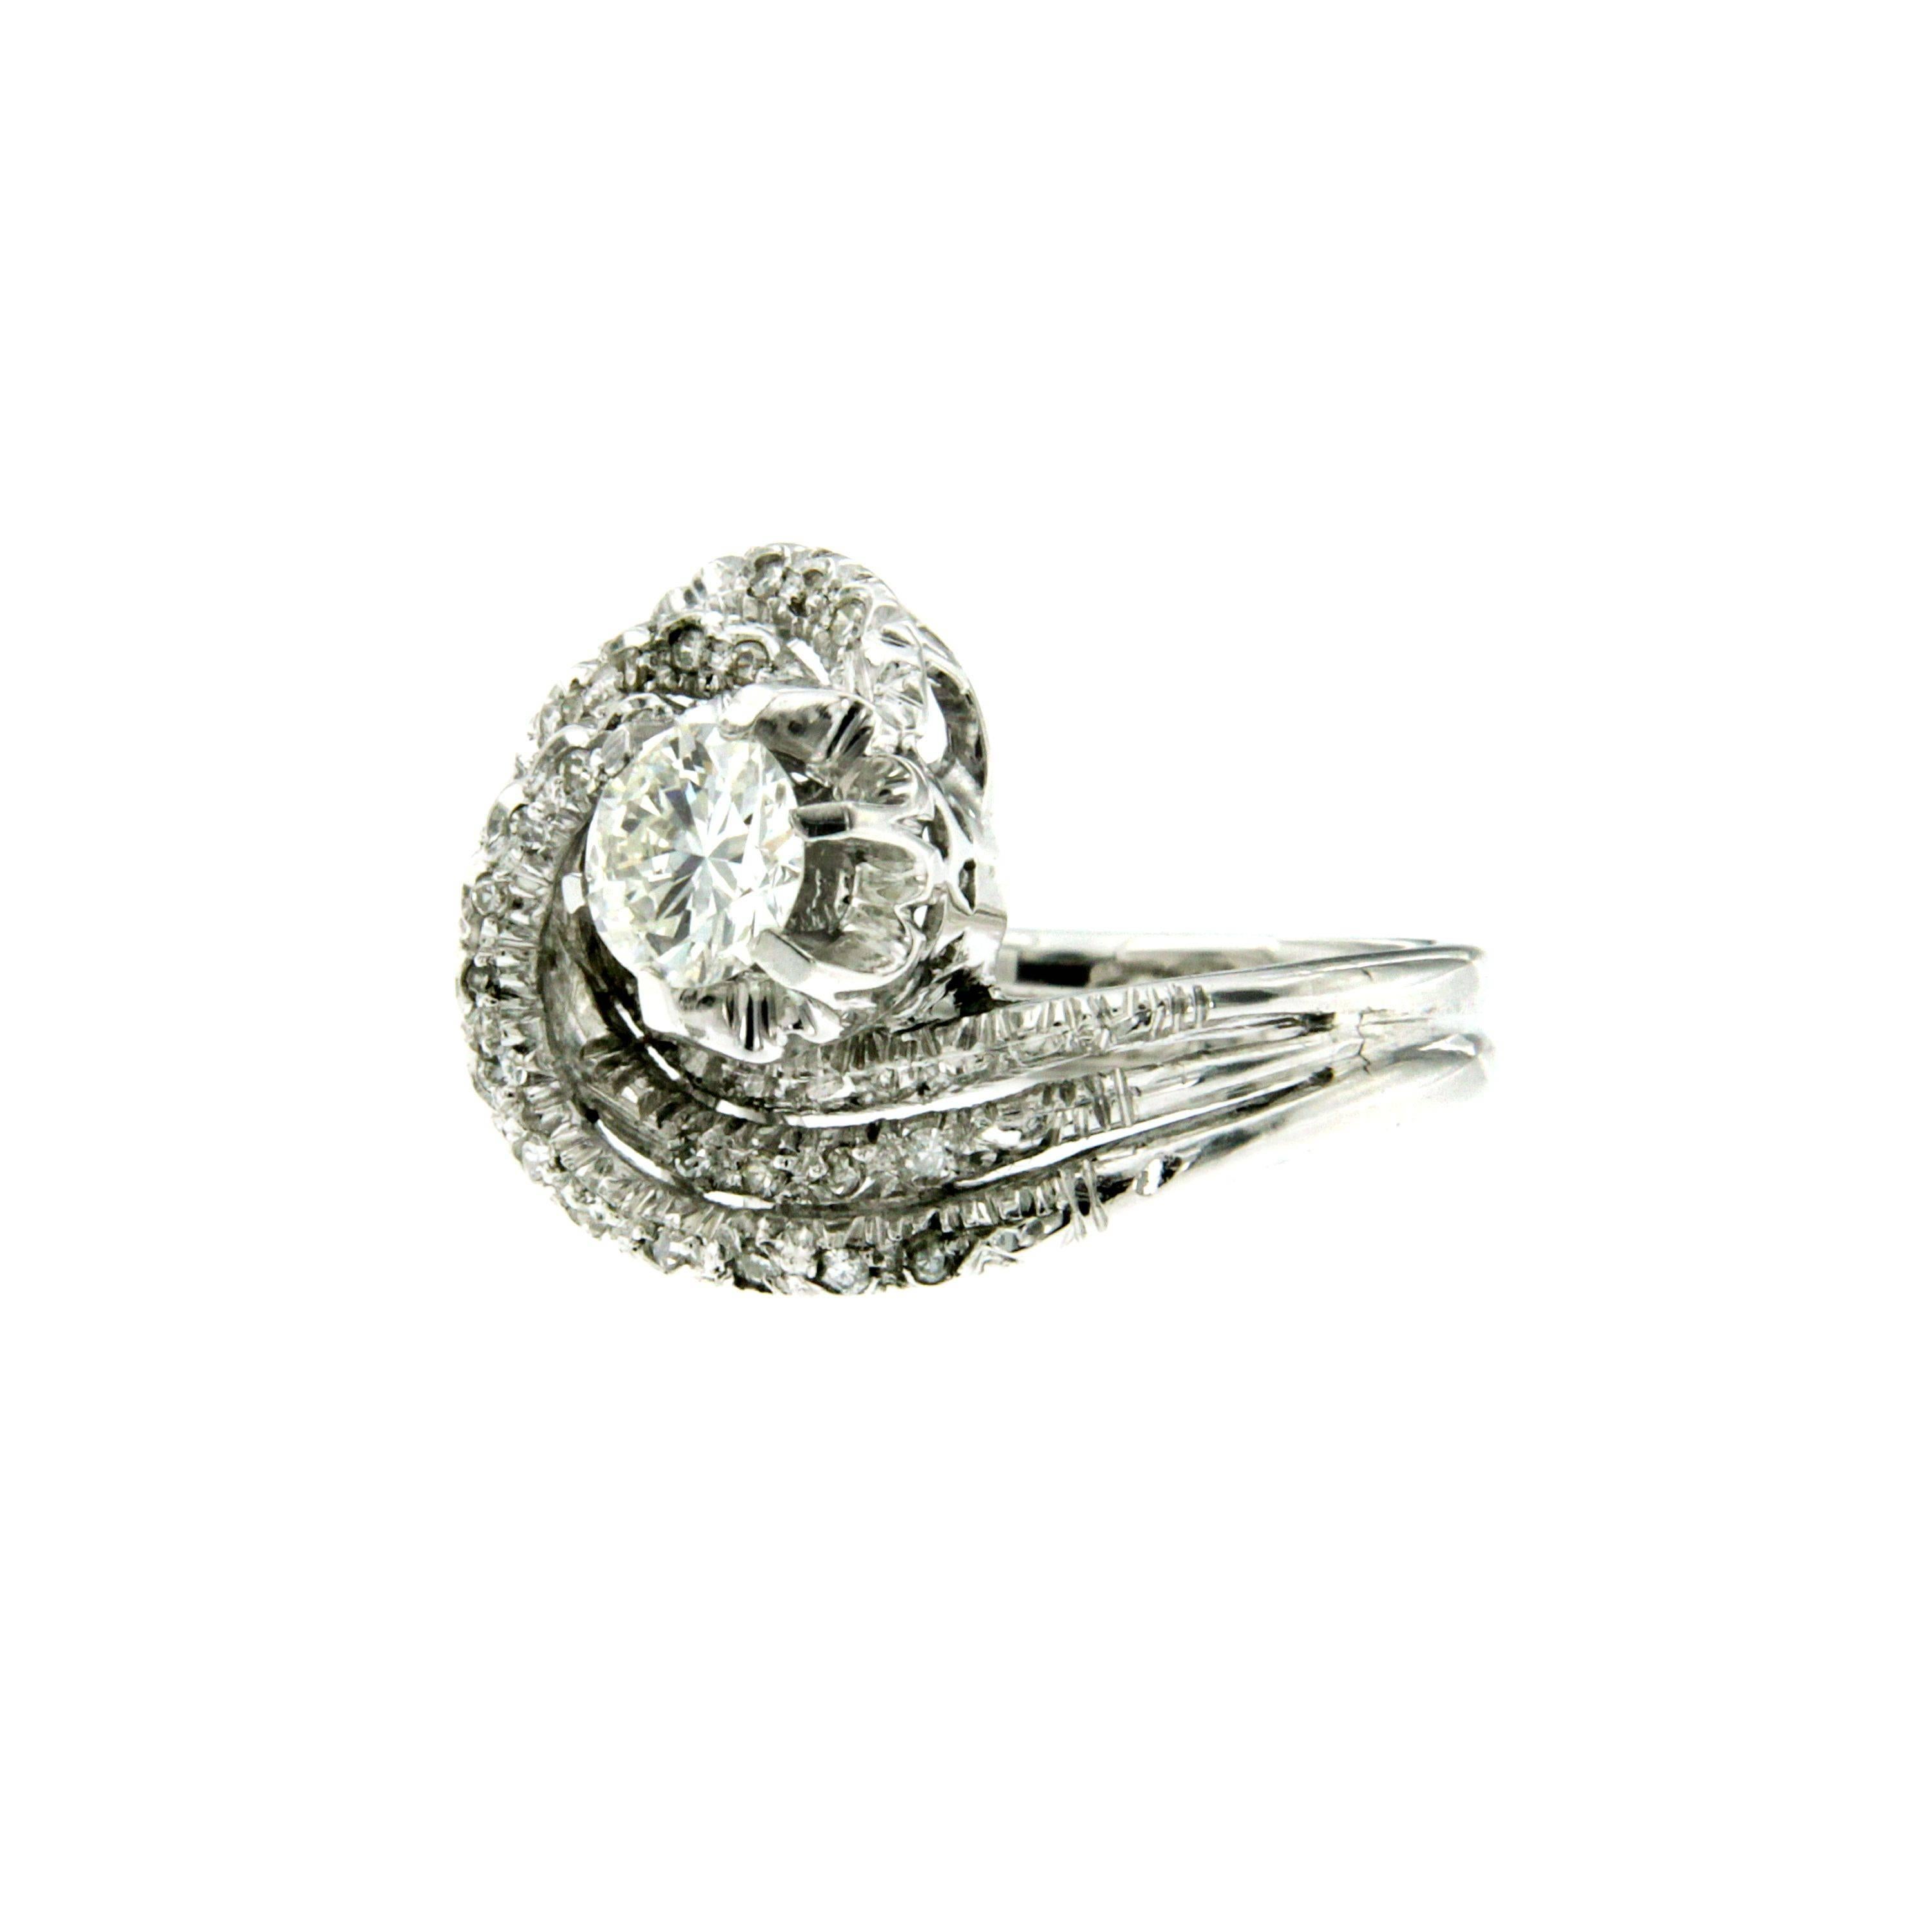 Unusual and elegant vintage diamond ring features a round brilliant cut diamond weighing 0.60 carats H color VVS, surrounded by smaller diamonds totaling approximately 0.15 carat. Circa 1970

CONDITION: Pre-owned - Excellent 
METAL: 18k white Gold